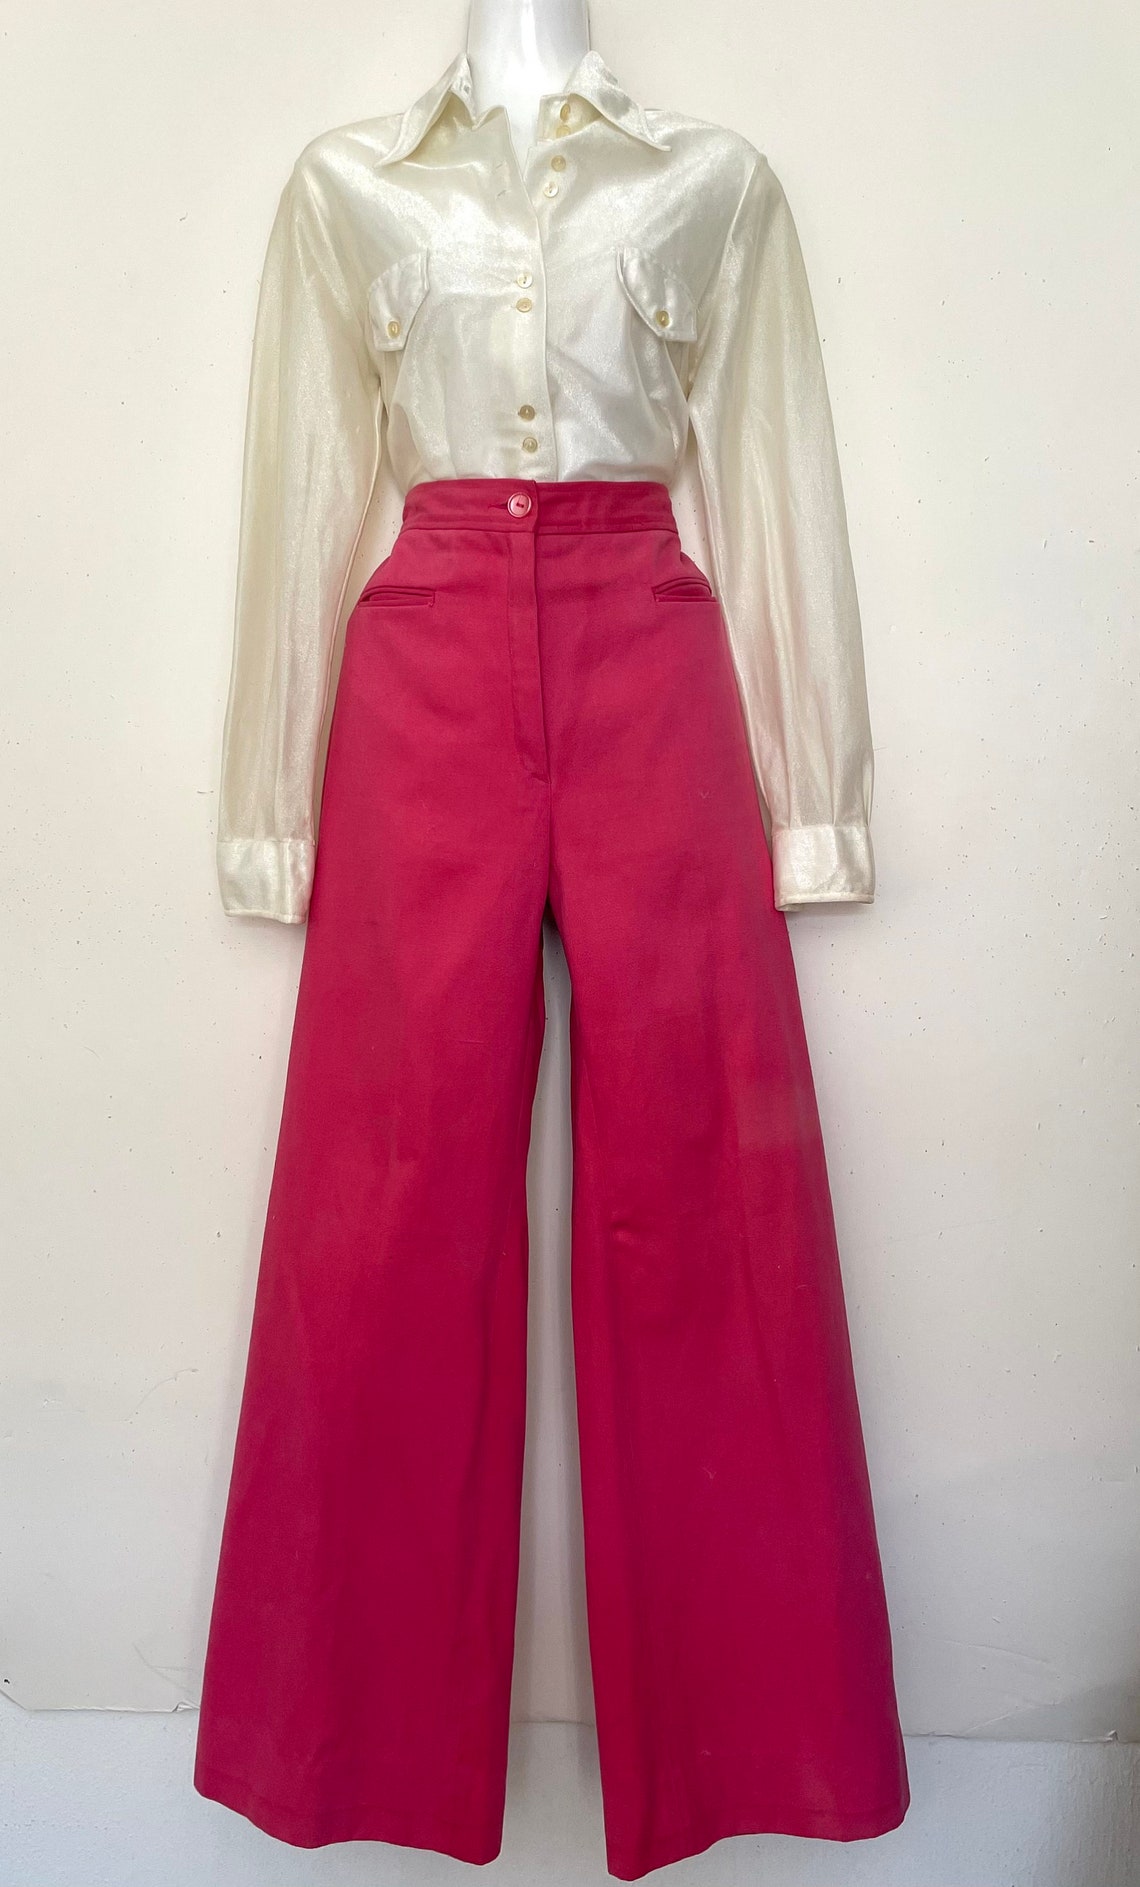 1970s HOT PINK WIDE Bell Bottoms Pants size 27x30 | Etsy